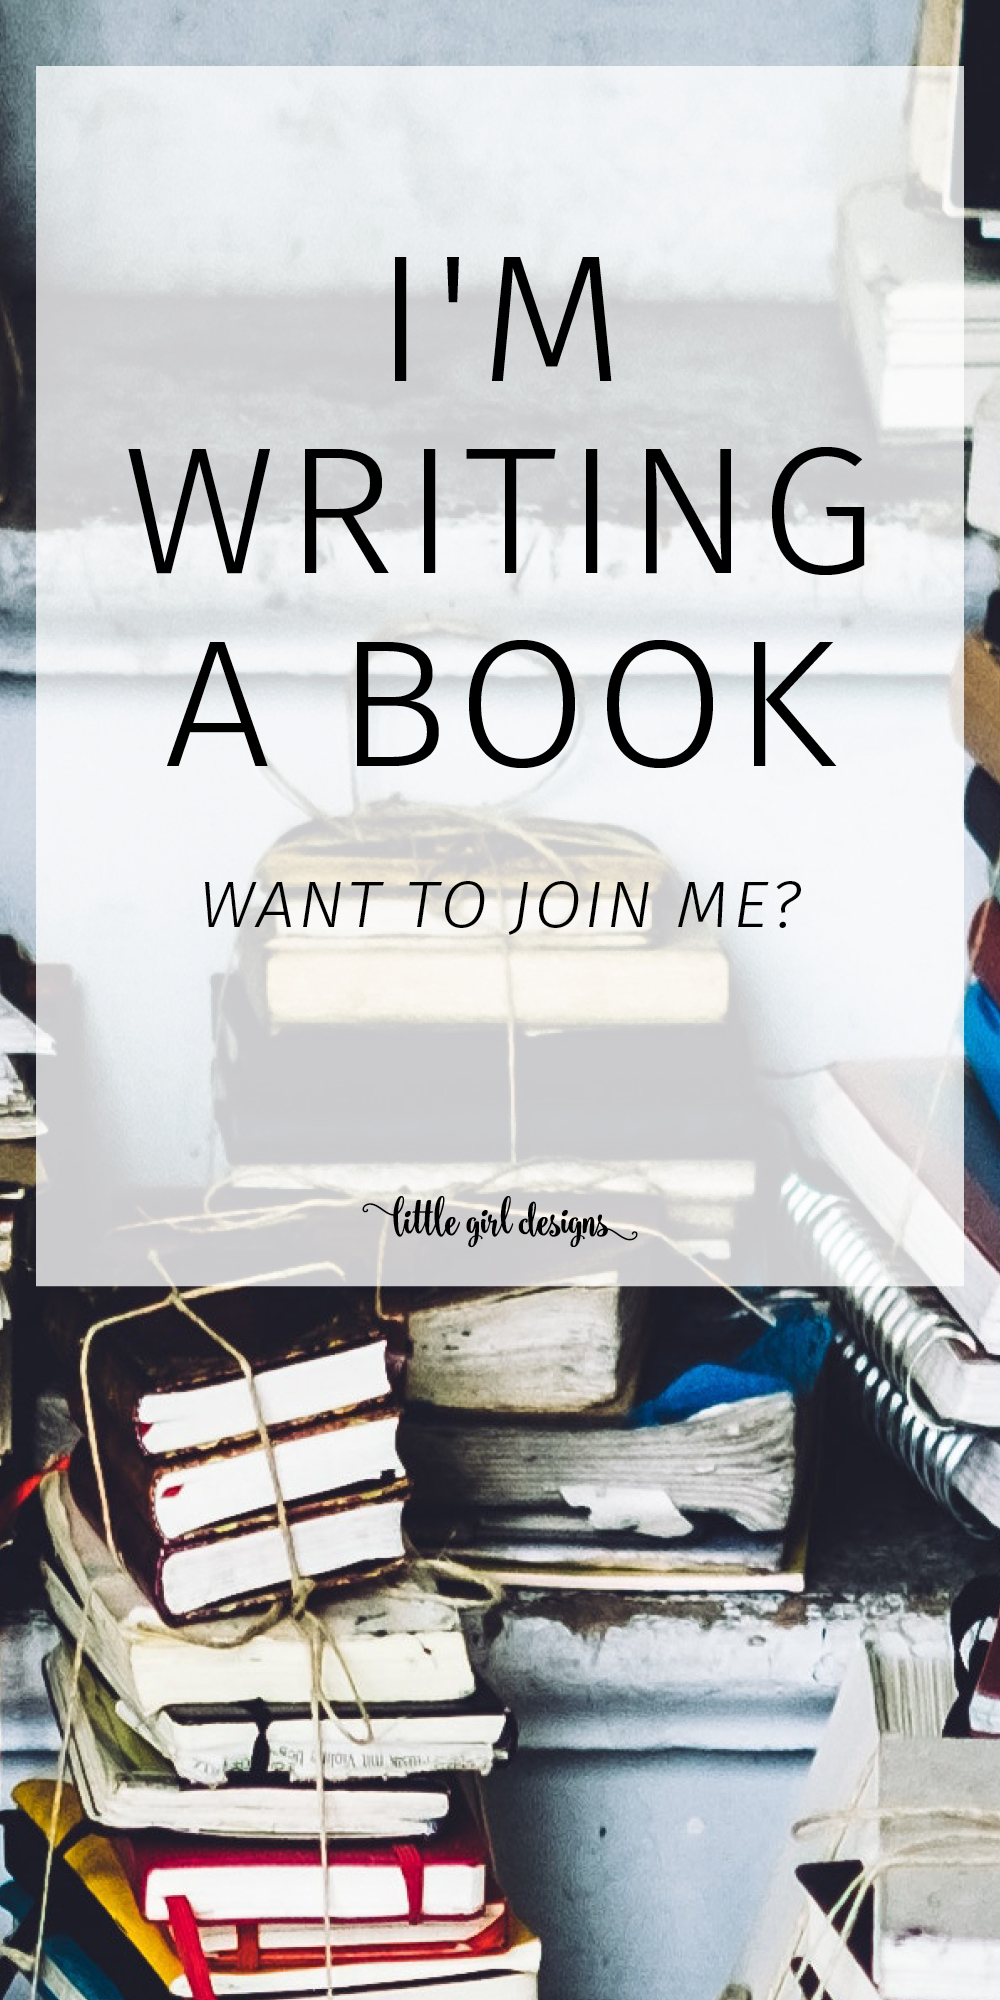 Well, I'm writing a book. Would you like to join me? I've been working on a new book for most of the year, but went about it the WRONG way. Here's what I'm doing differently.